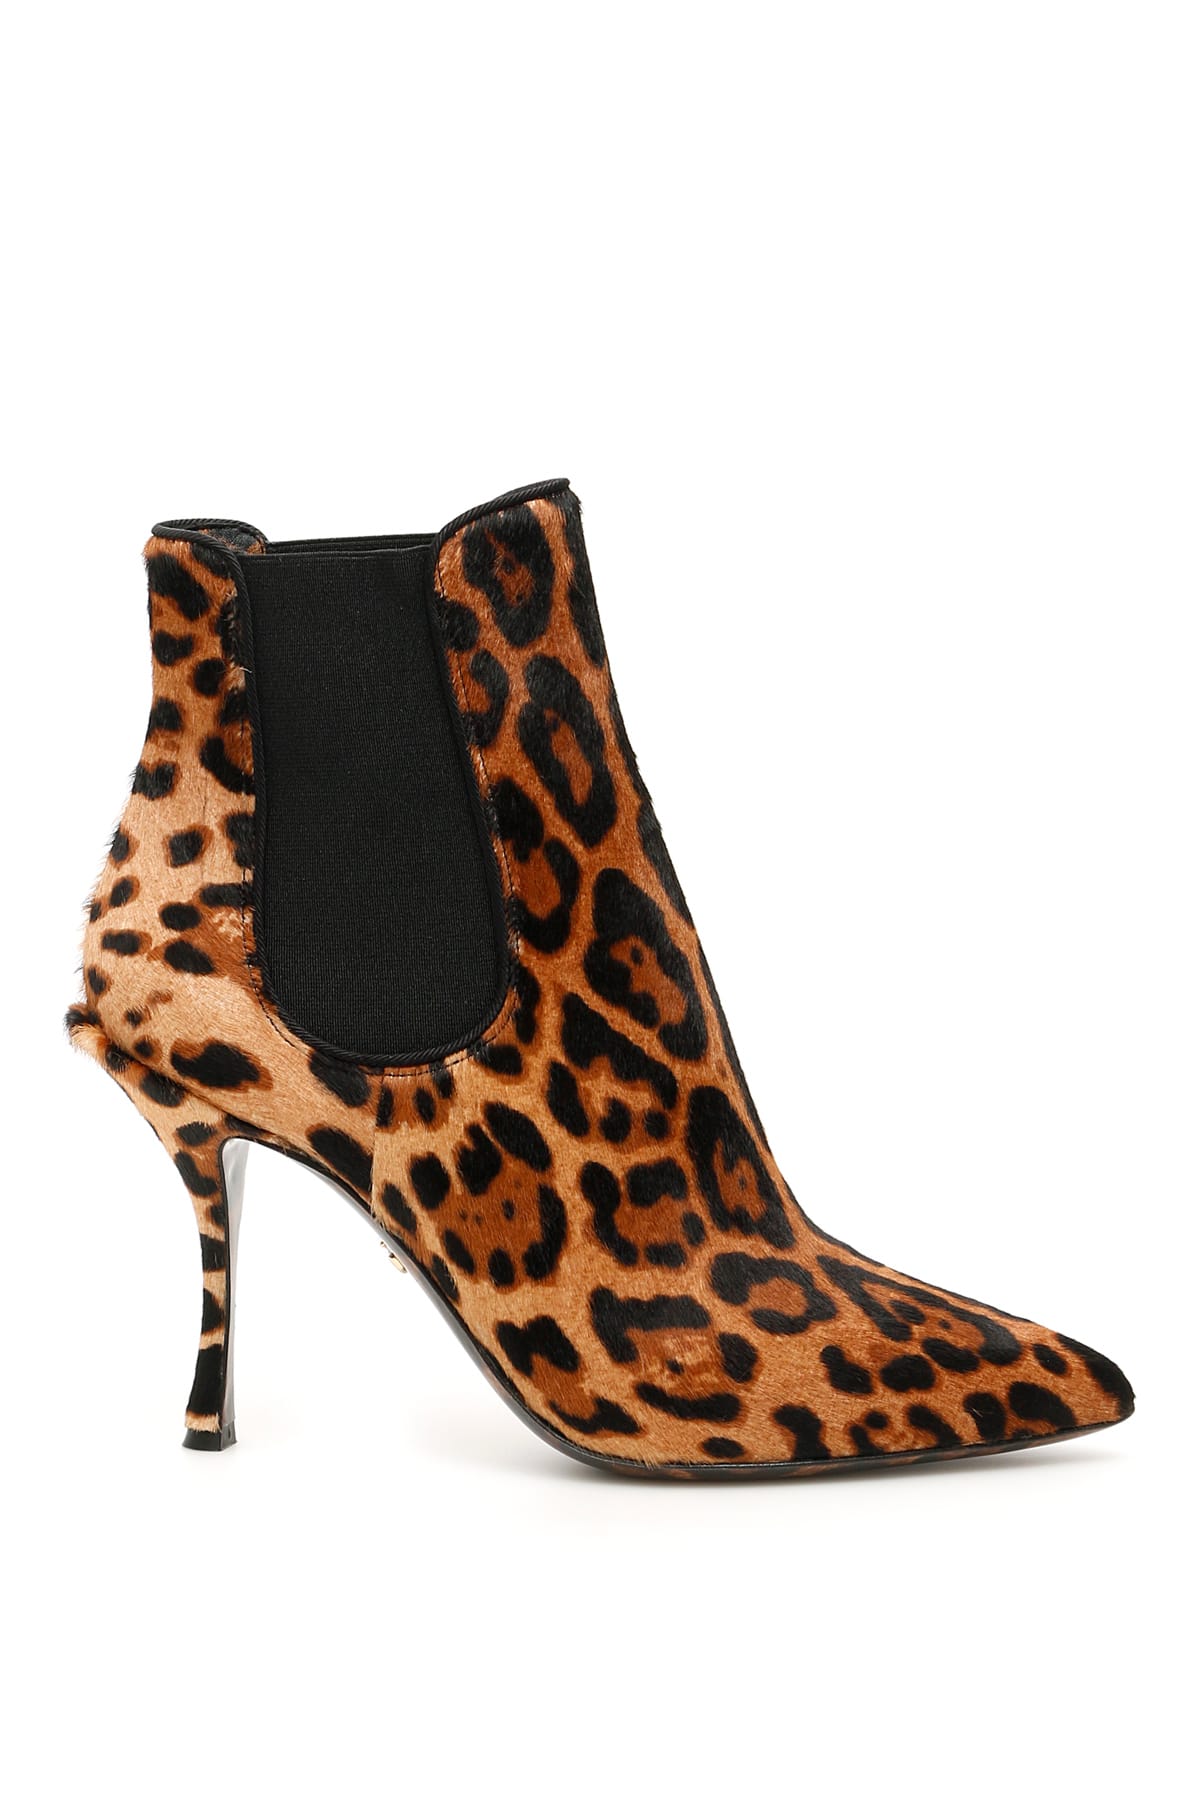 Buy Dolce & Gabbana Animalier Lori Ankle Boots online, shop Dolce & Gabbana shoes with free shipping